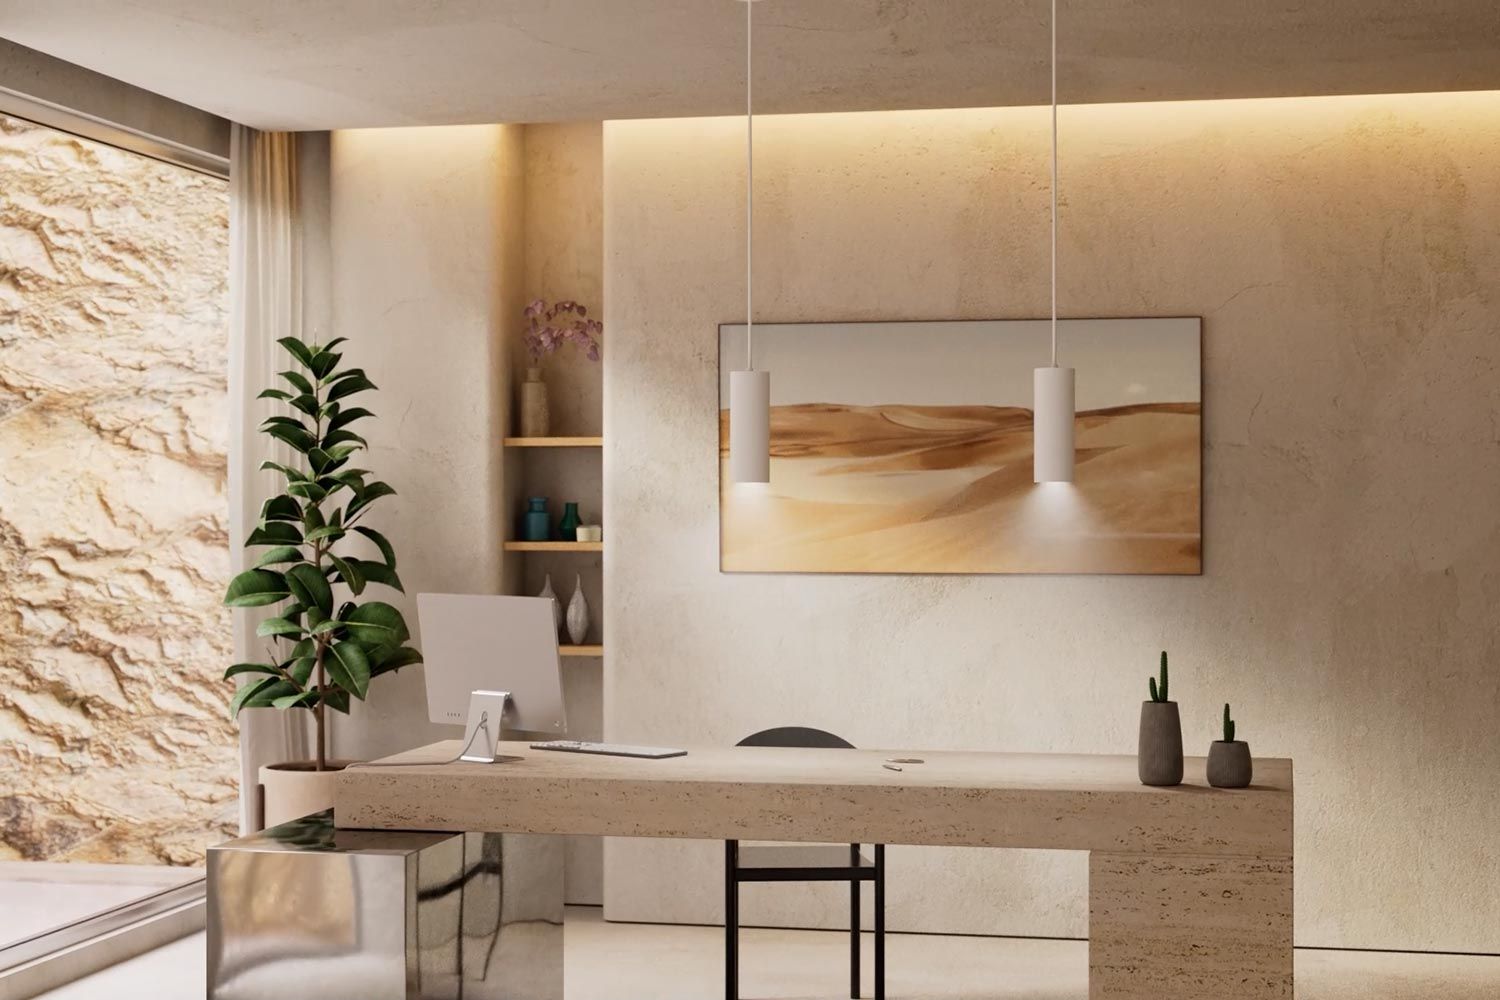 A modern office space with a minimalist design, featuring a stone desk, two pendant lights, a large plant, and a serene painting of sand dunes on the wall.